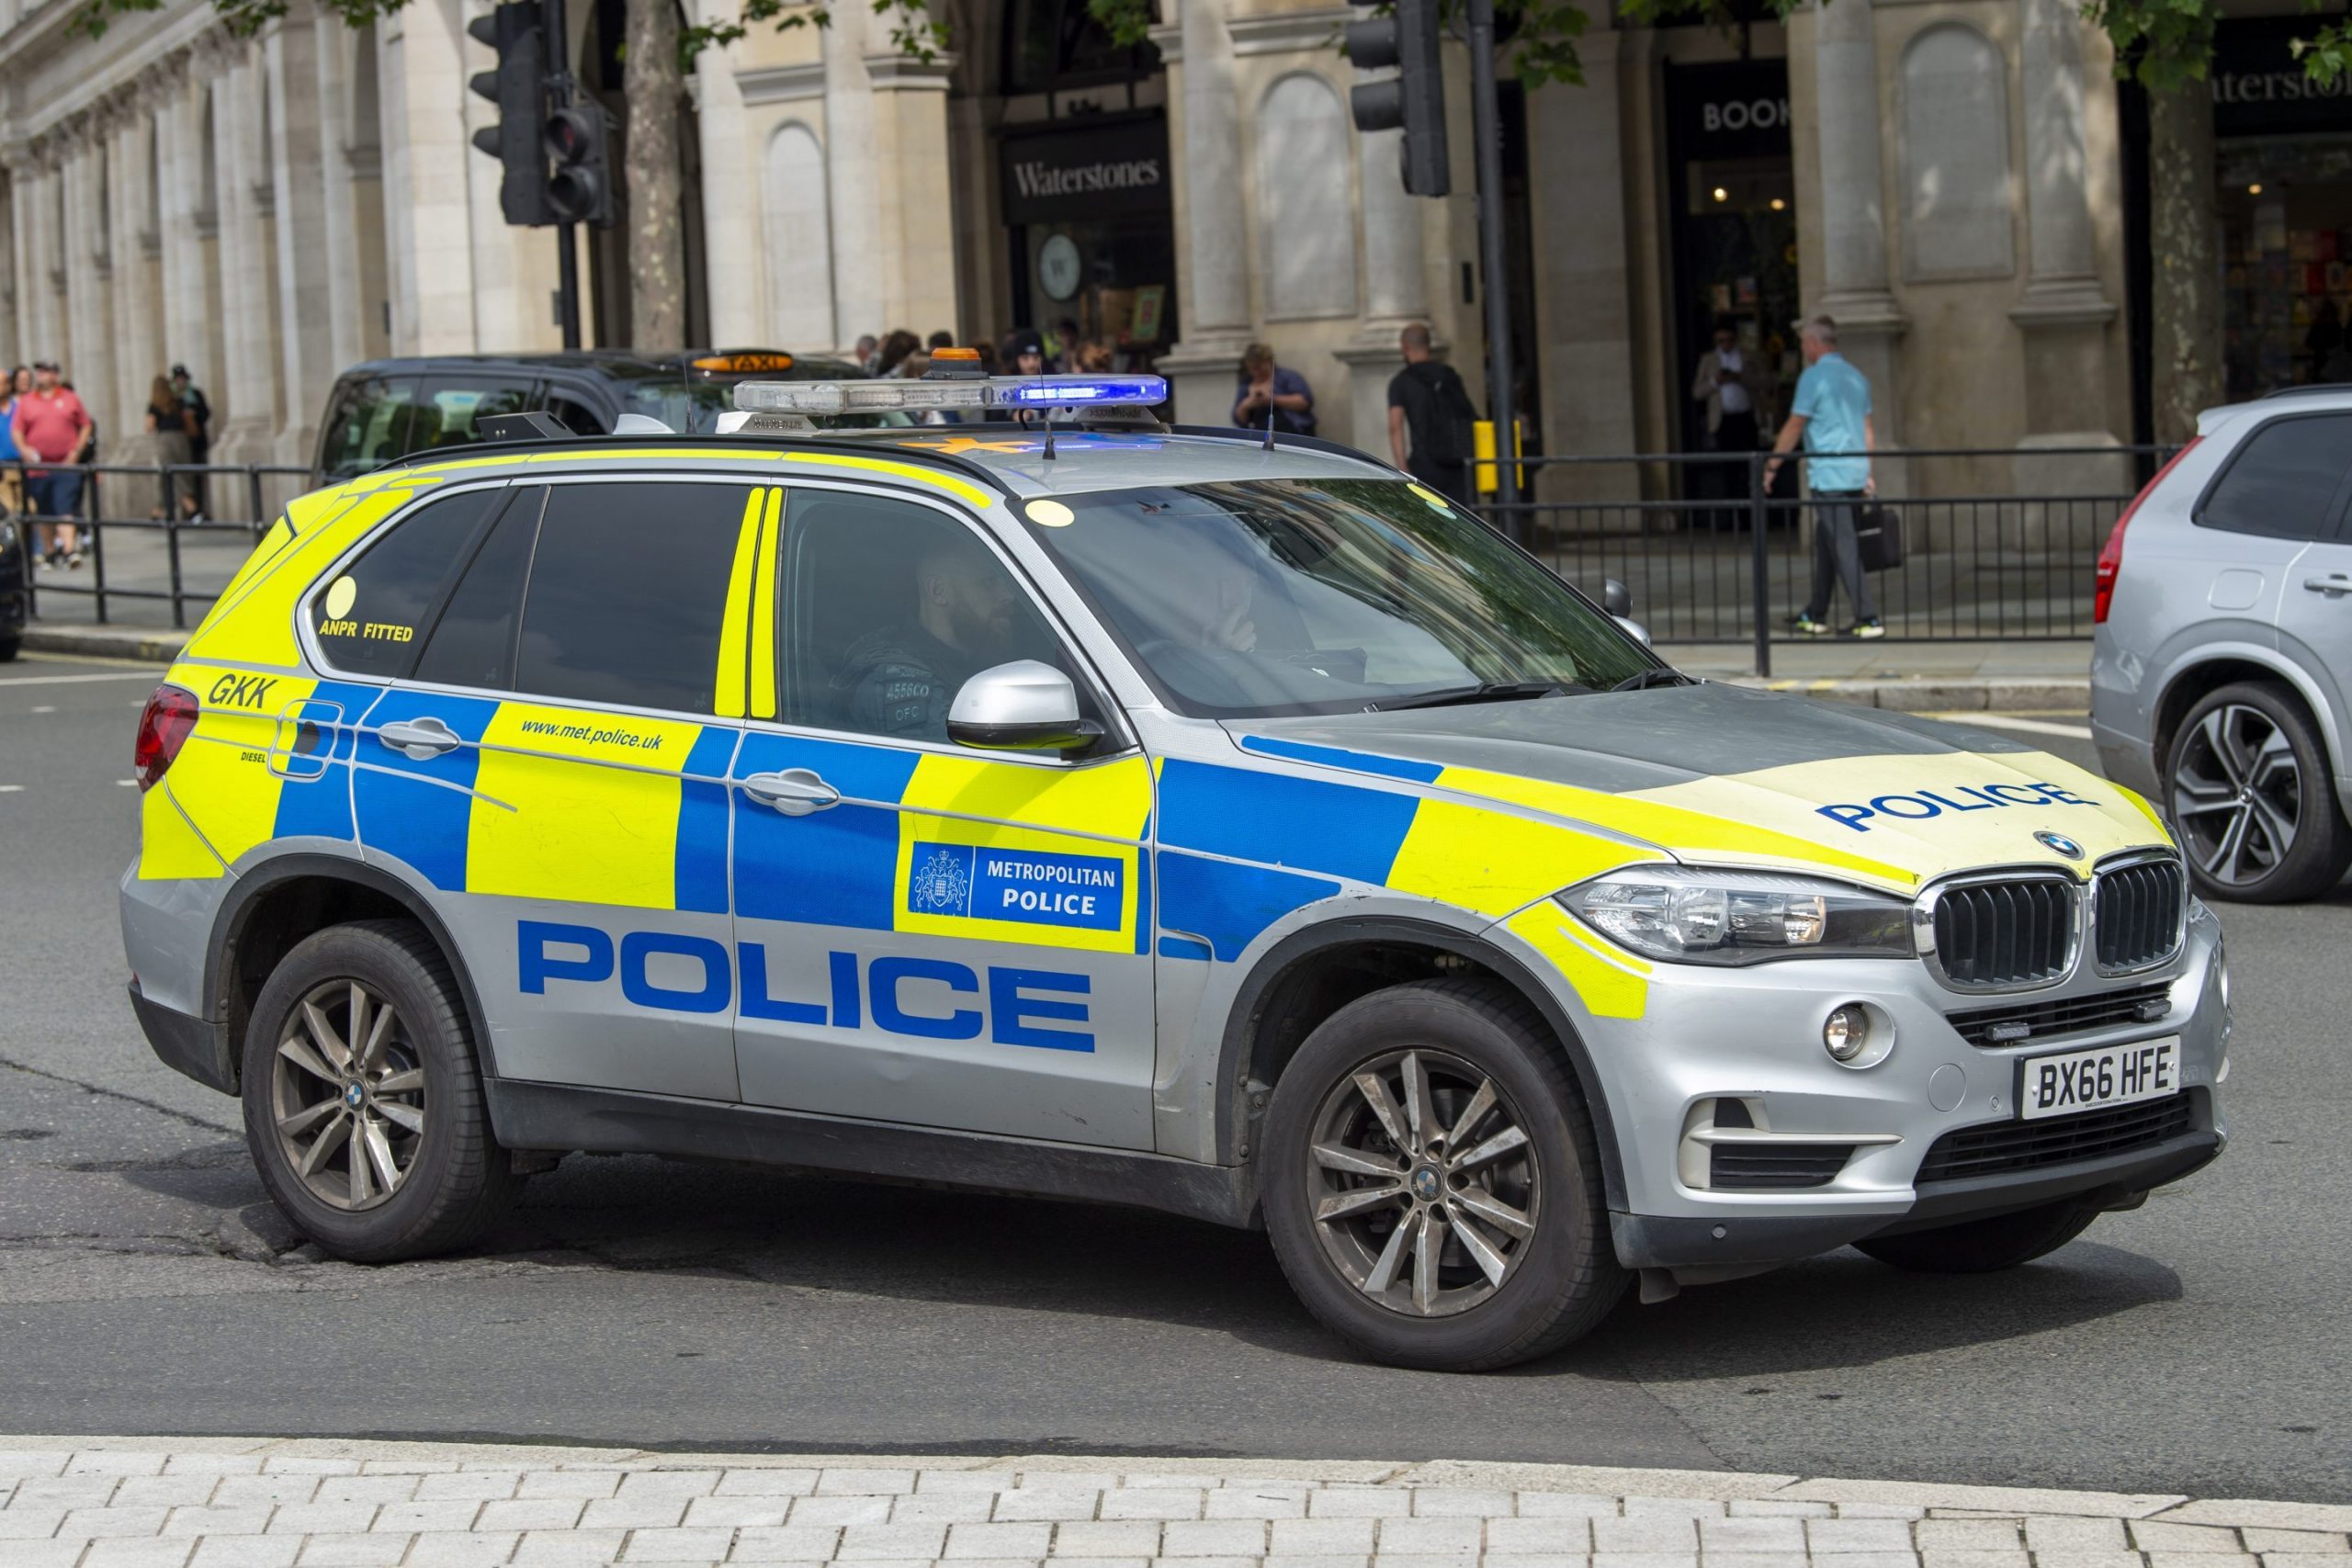 Crypto's latest hiring spree is targeting former police in the U.K.